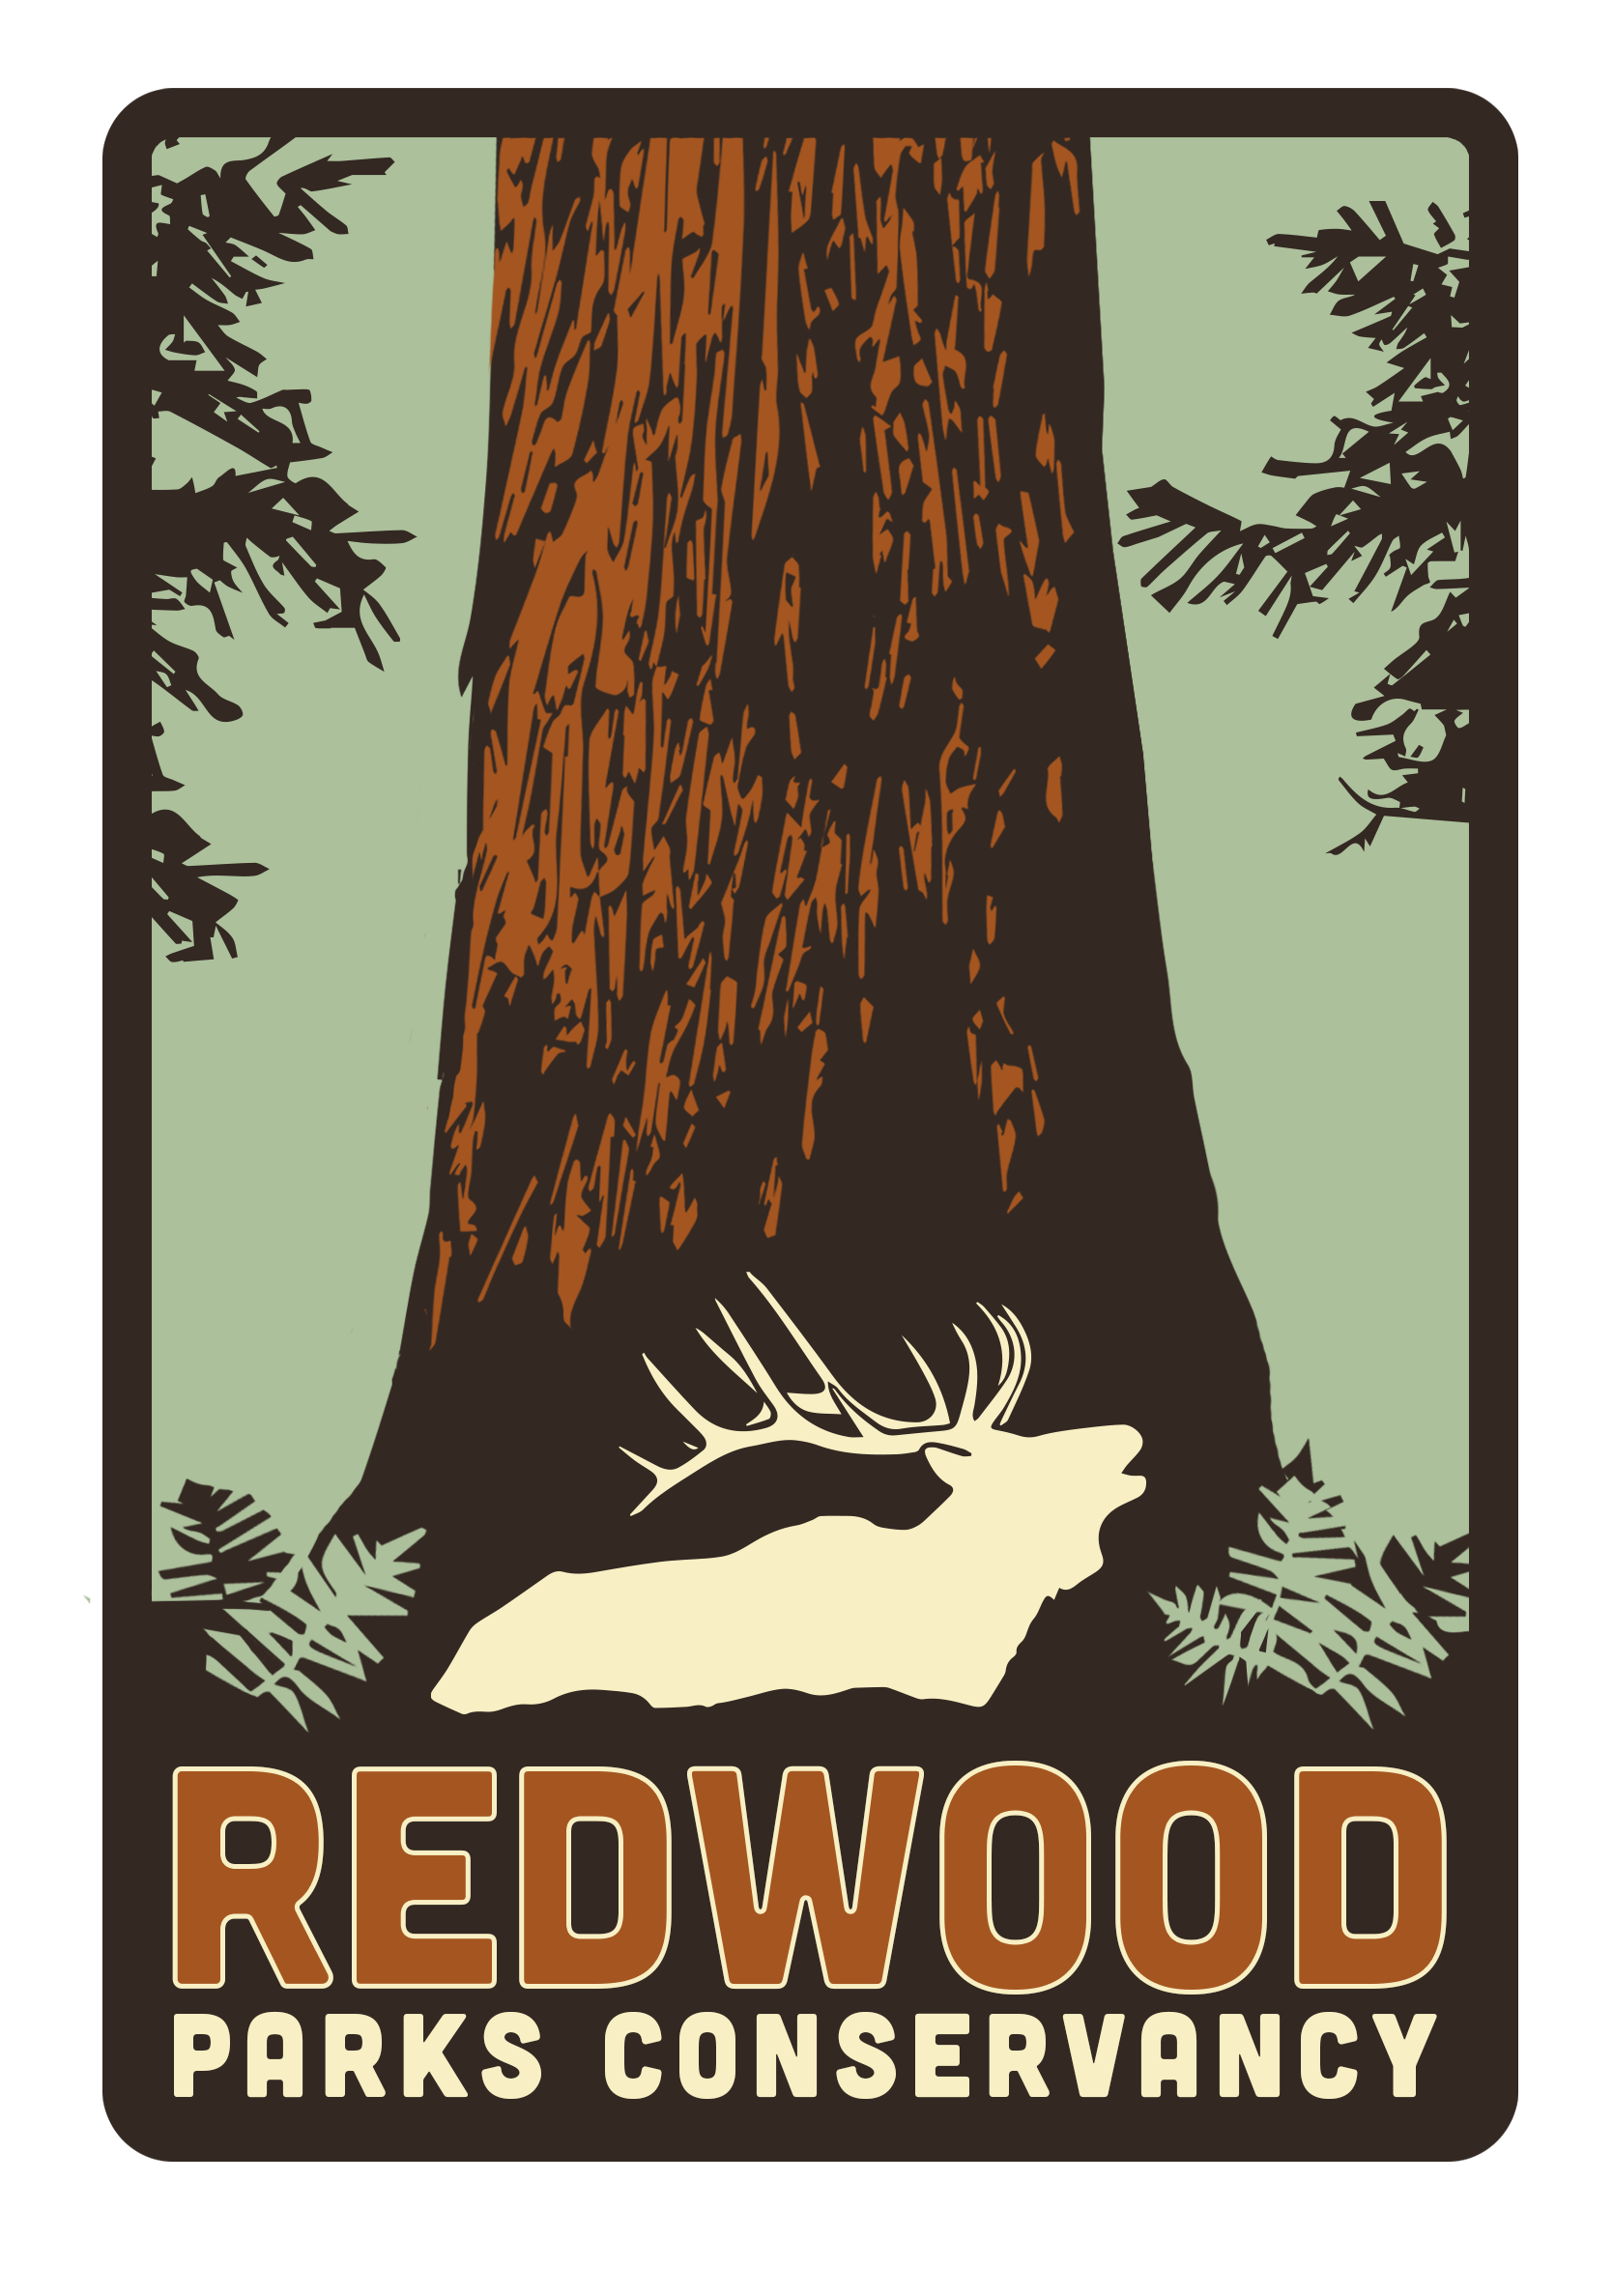 logo of redwood parks conservancy. A redwood tree, elk and text.